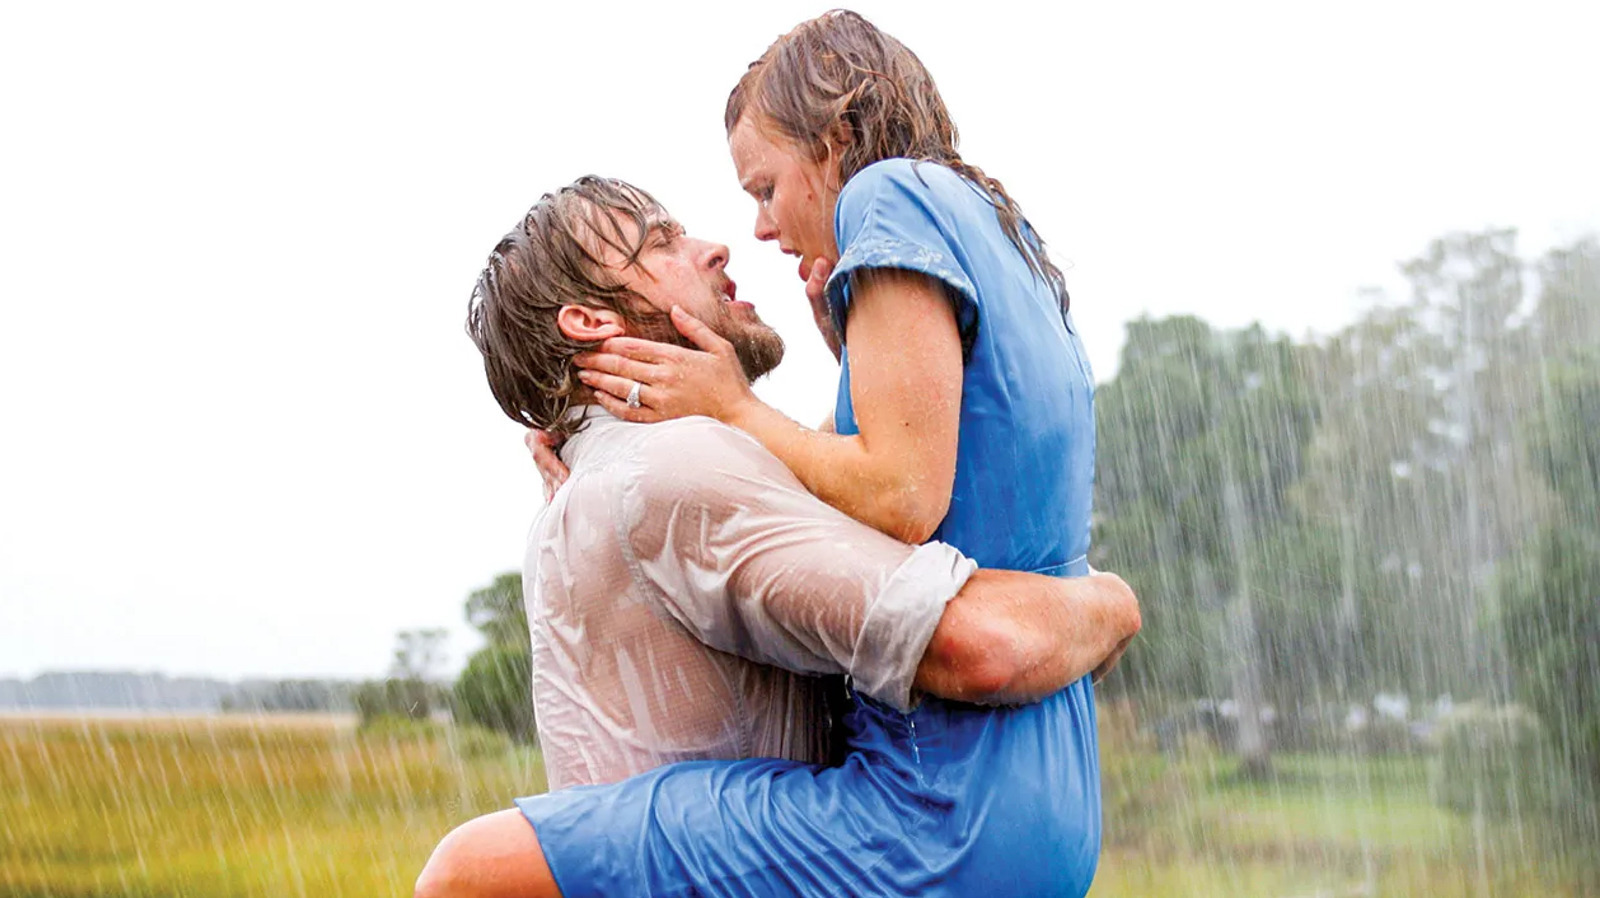 Here's where you can watch the notebook